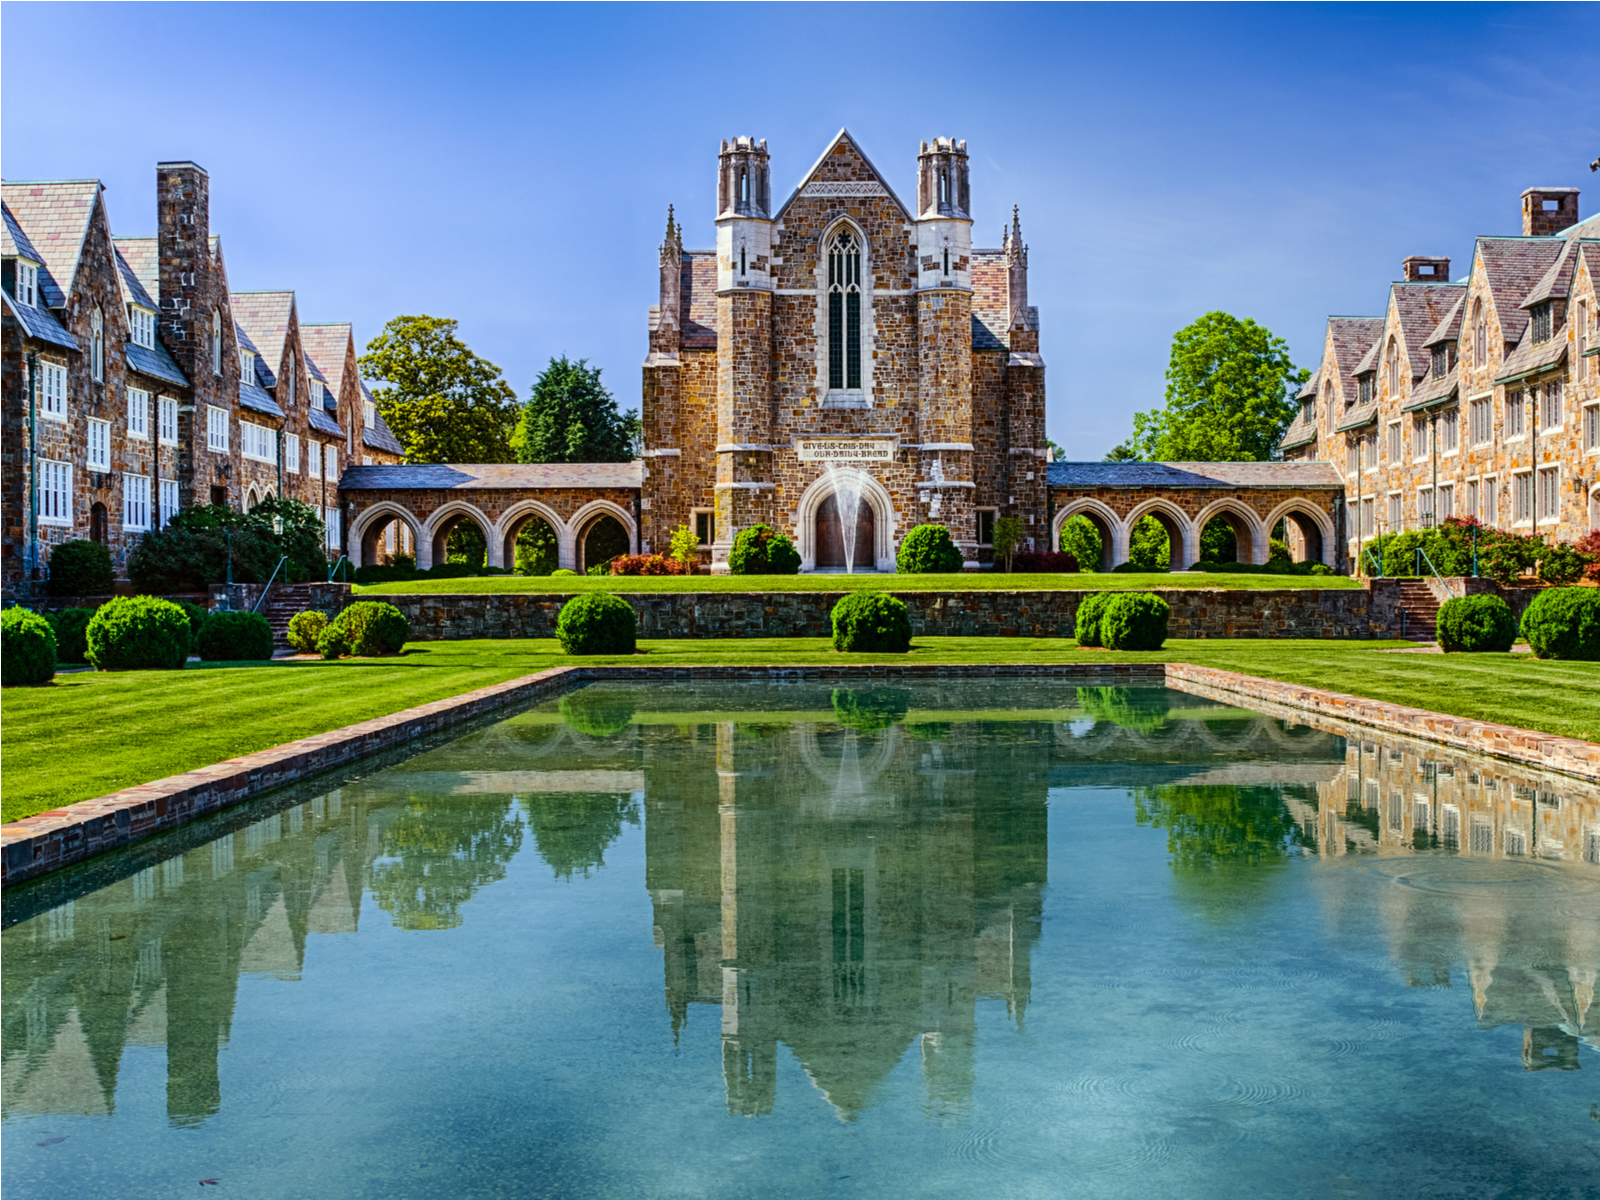 As the overall most beautiful college campus in the United States, the dining hall at Berry College in Georgie pictured with a fountain in front